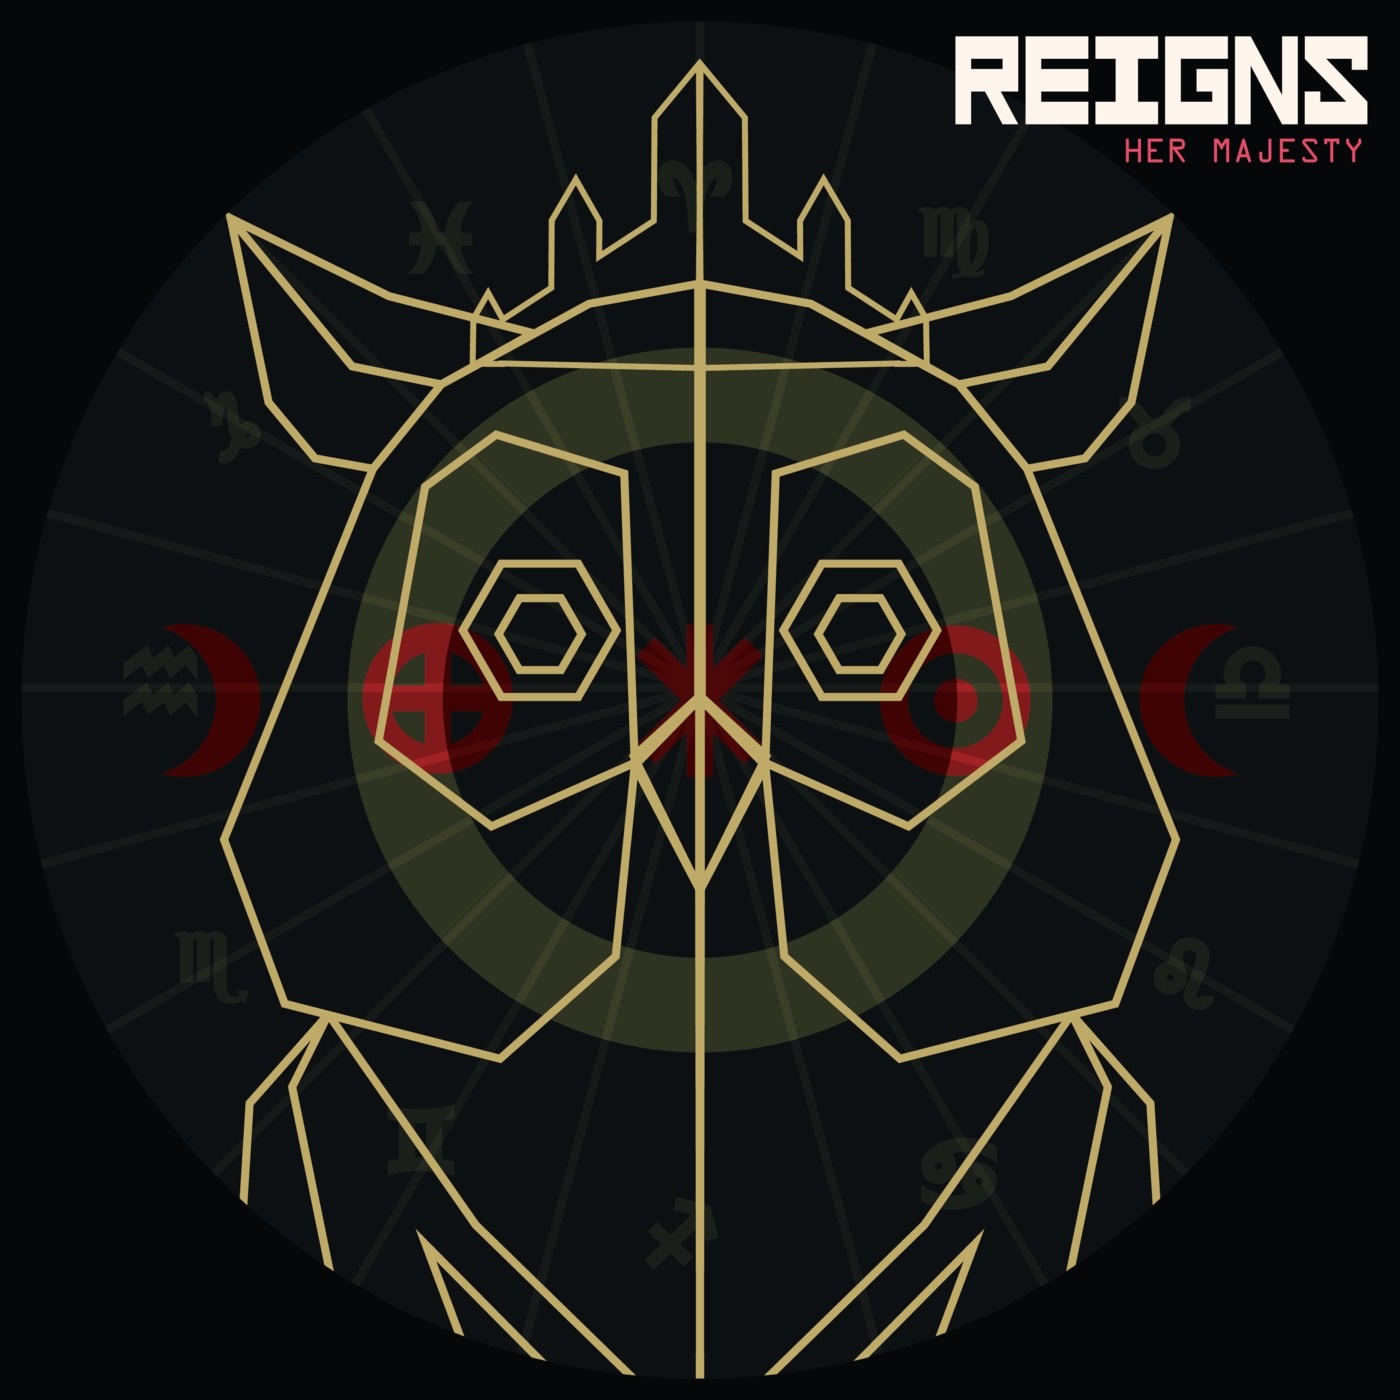 download free reigns her majesty